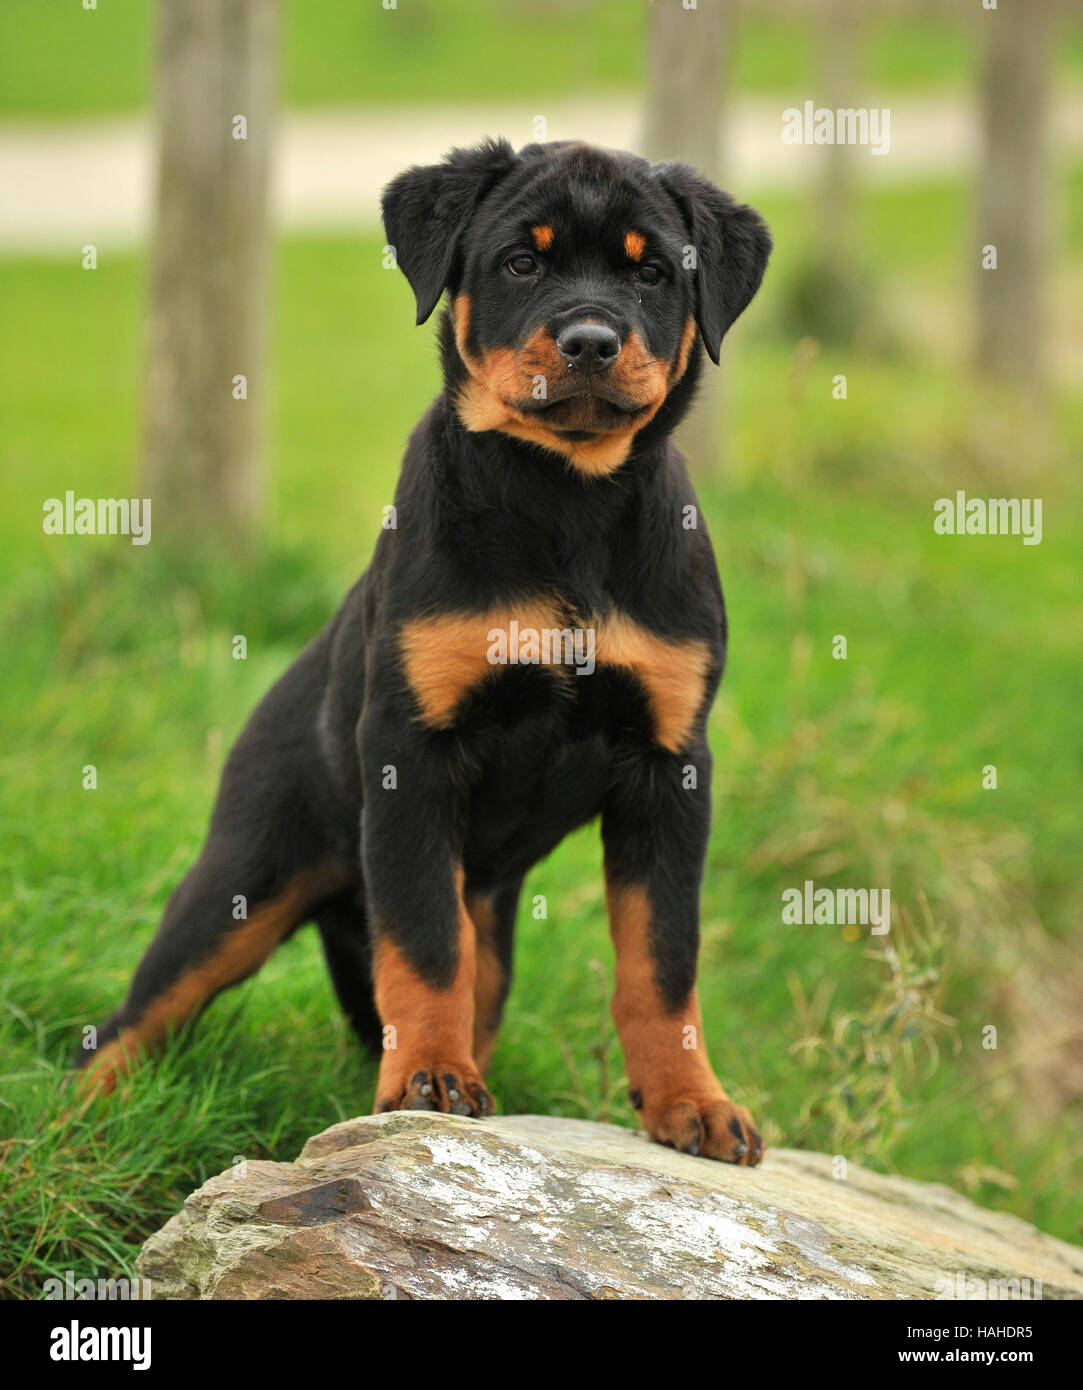 longhaired rottweiler puppy Stock Photo - Alamy